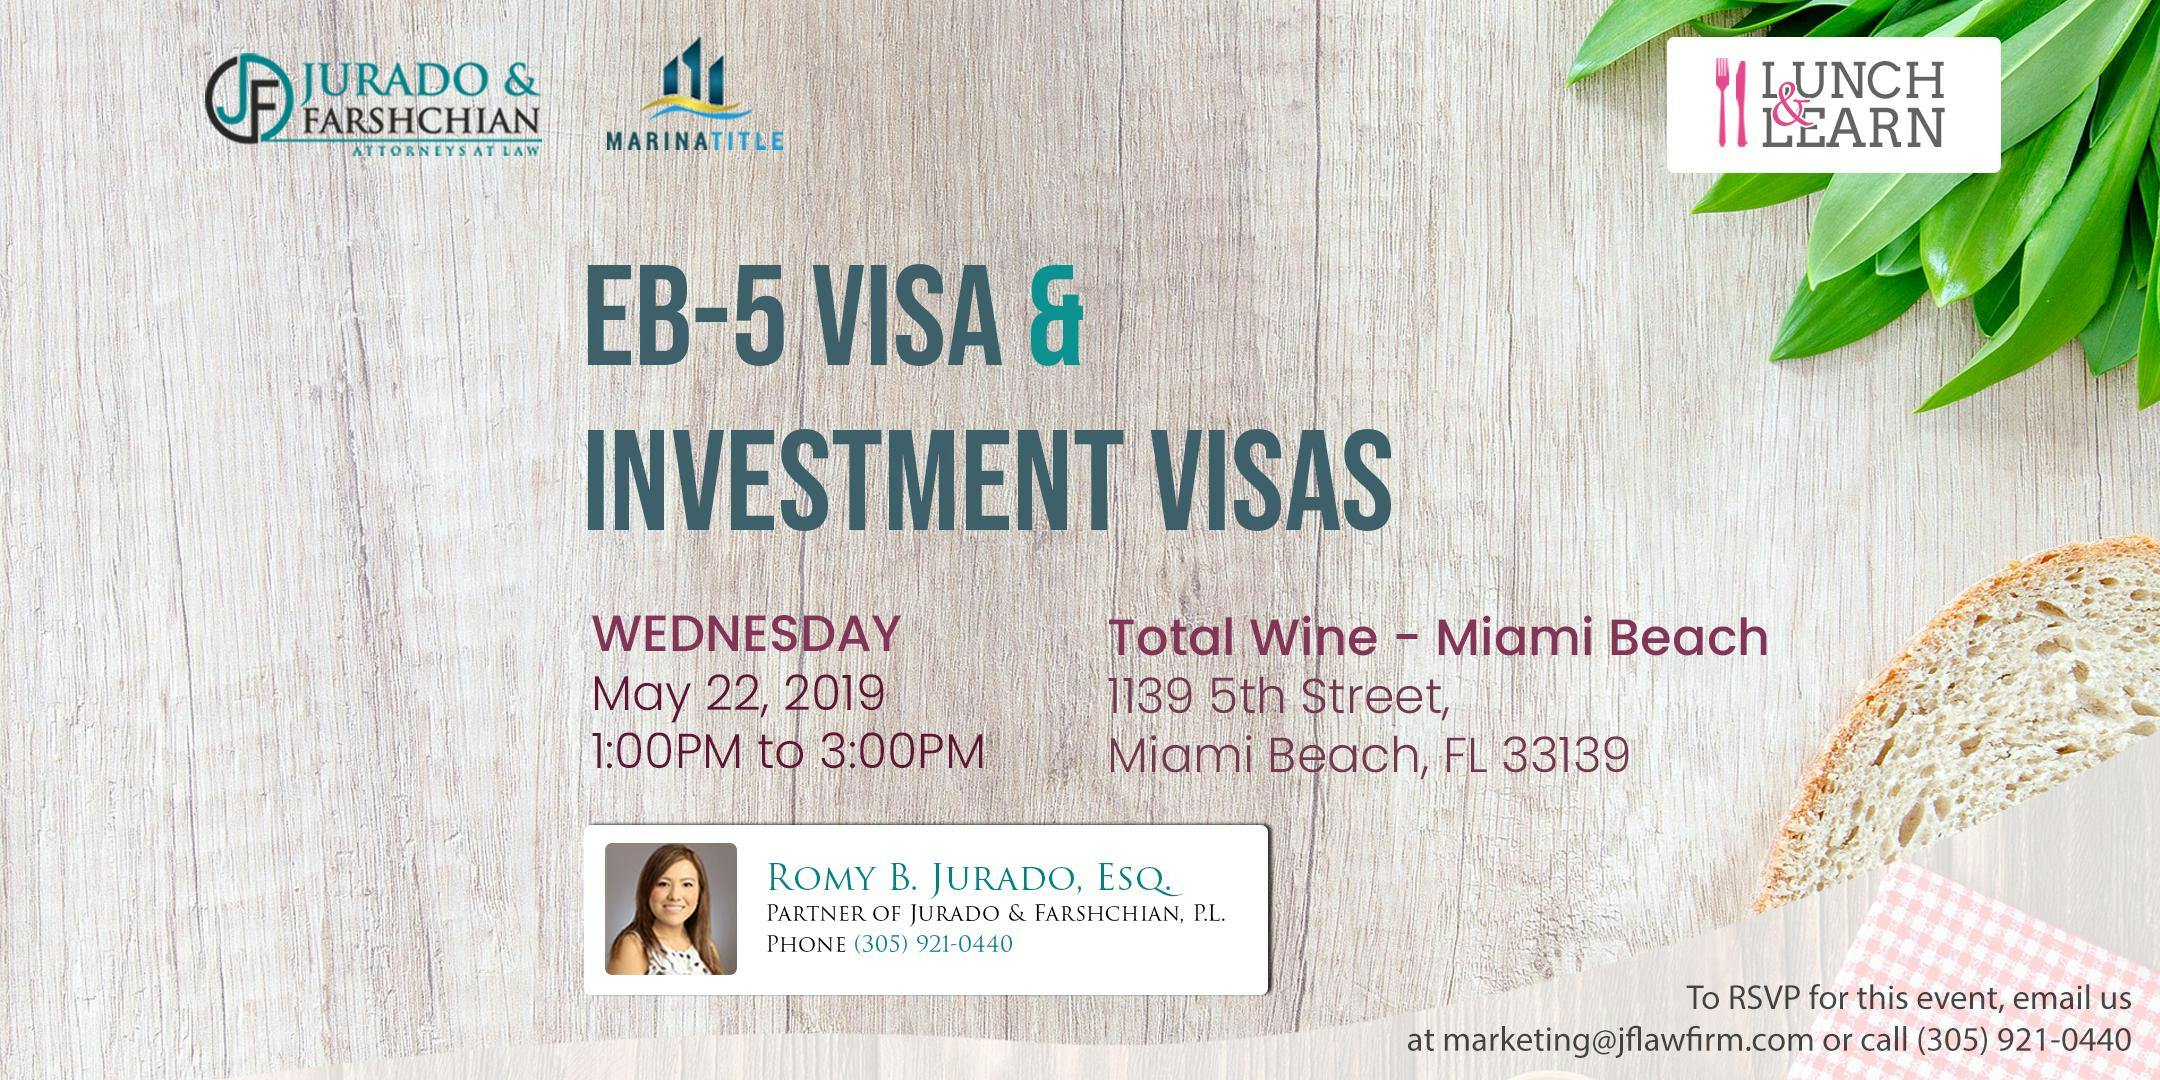 Lunch & Learn - EB-5 Visa and Investment Visas